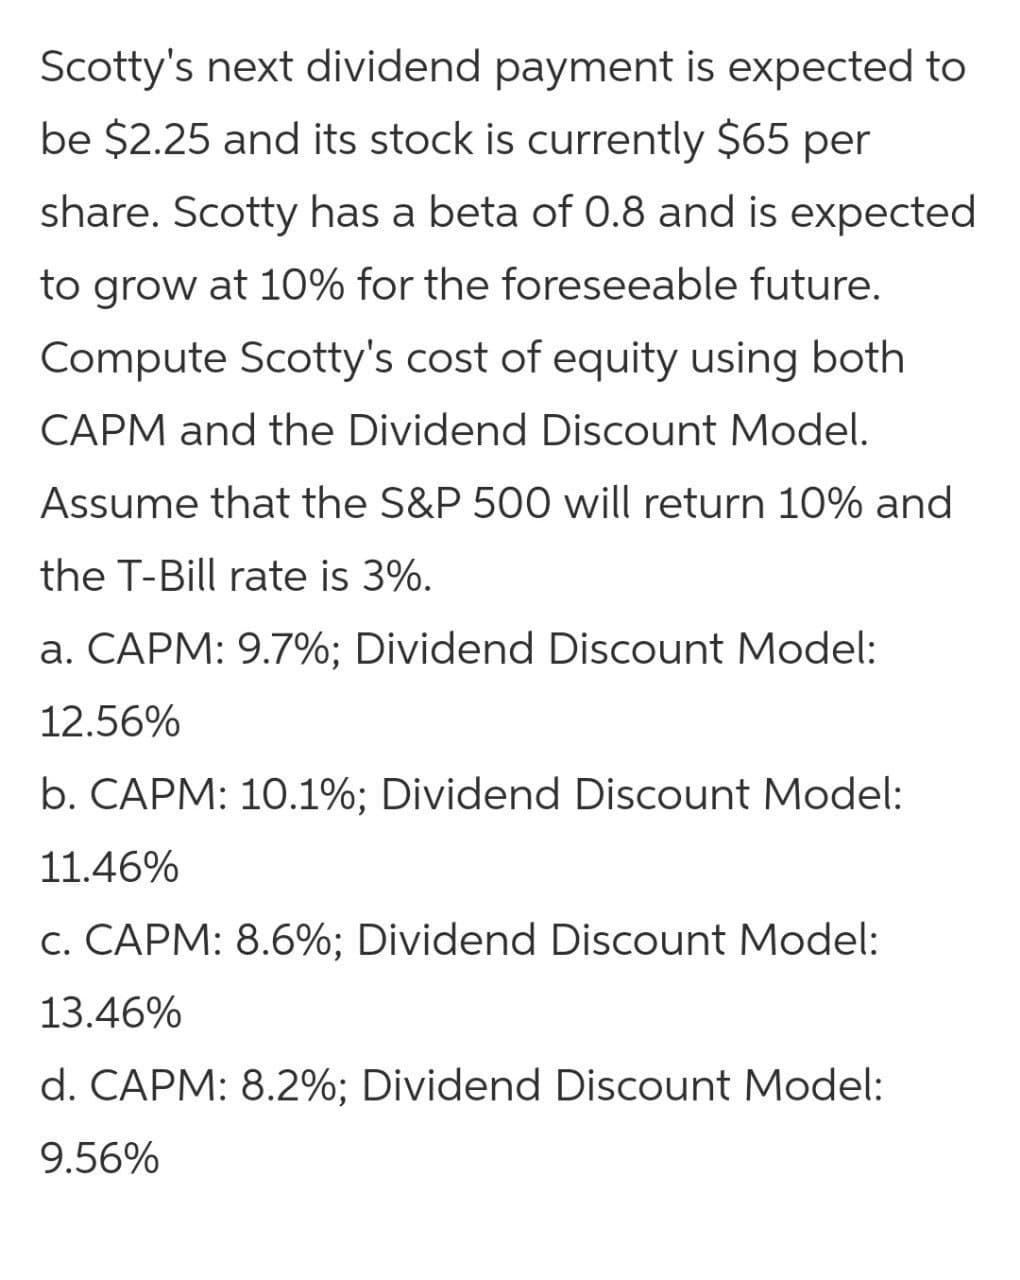 Scotty's next dividend payment is expected to
be $2.25 and its stock is currently $65 per
share. Scotty has a beta of 0.8 and is expected
to grow at 10% for the foreseeable future.
Compute Scotty's cost of equity using both
CAPM and the Dividend Discount Model.
Assume that the S&P 500 will return 10% and
the T-Bill rate is 3%.
a. CAPM: 9.7%; Dividend Discount Model:
12.56%
b. CAPM: 10.1%; Dividend Discount Model:
11.46%
c. CAPM: 8.6%; Dividend Discount Model:
13.46%
d. CAPM: 8.2%; Dividend Discount Model:
9.56%
